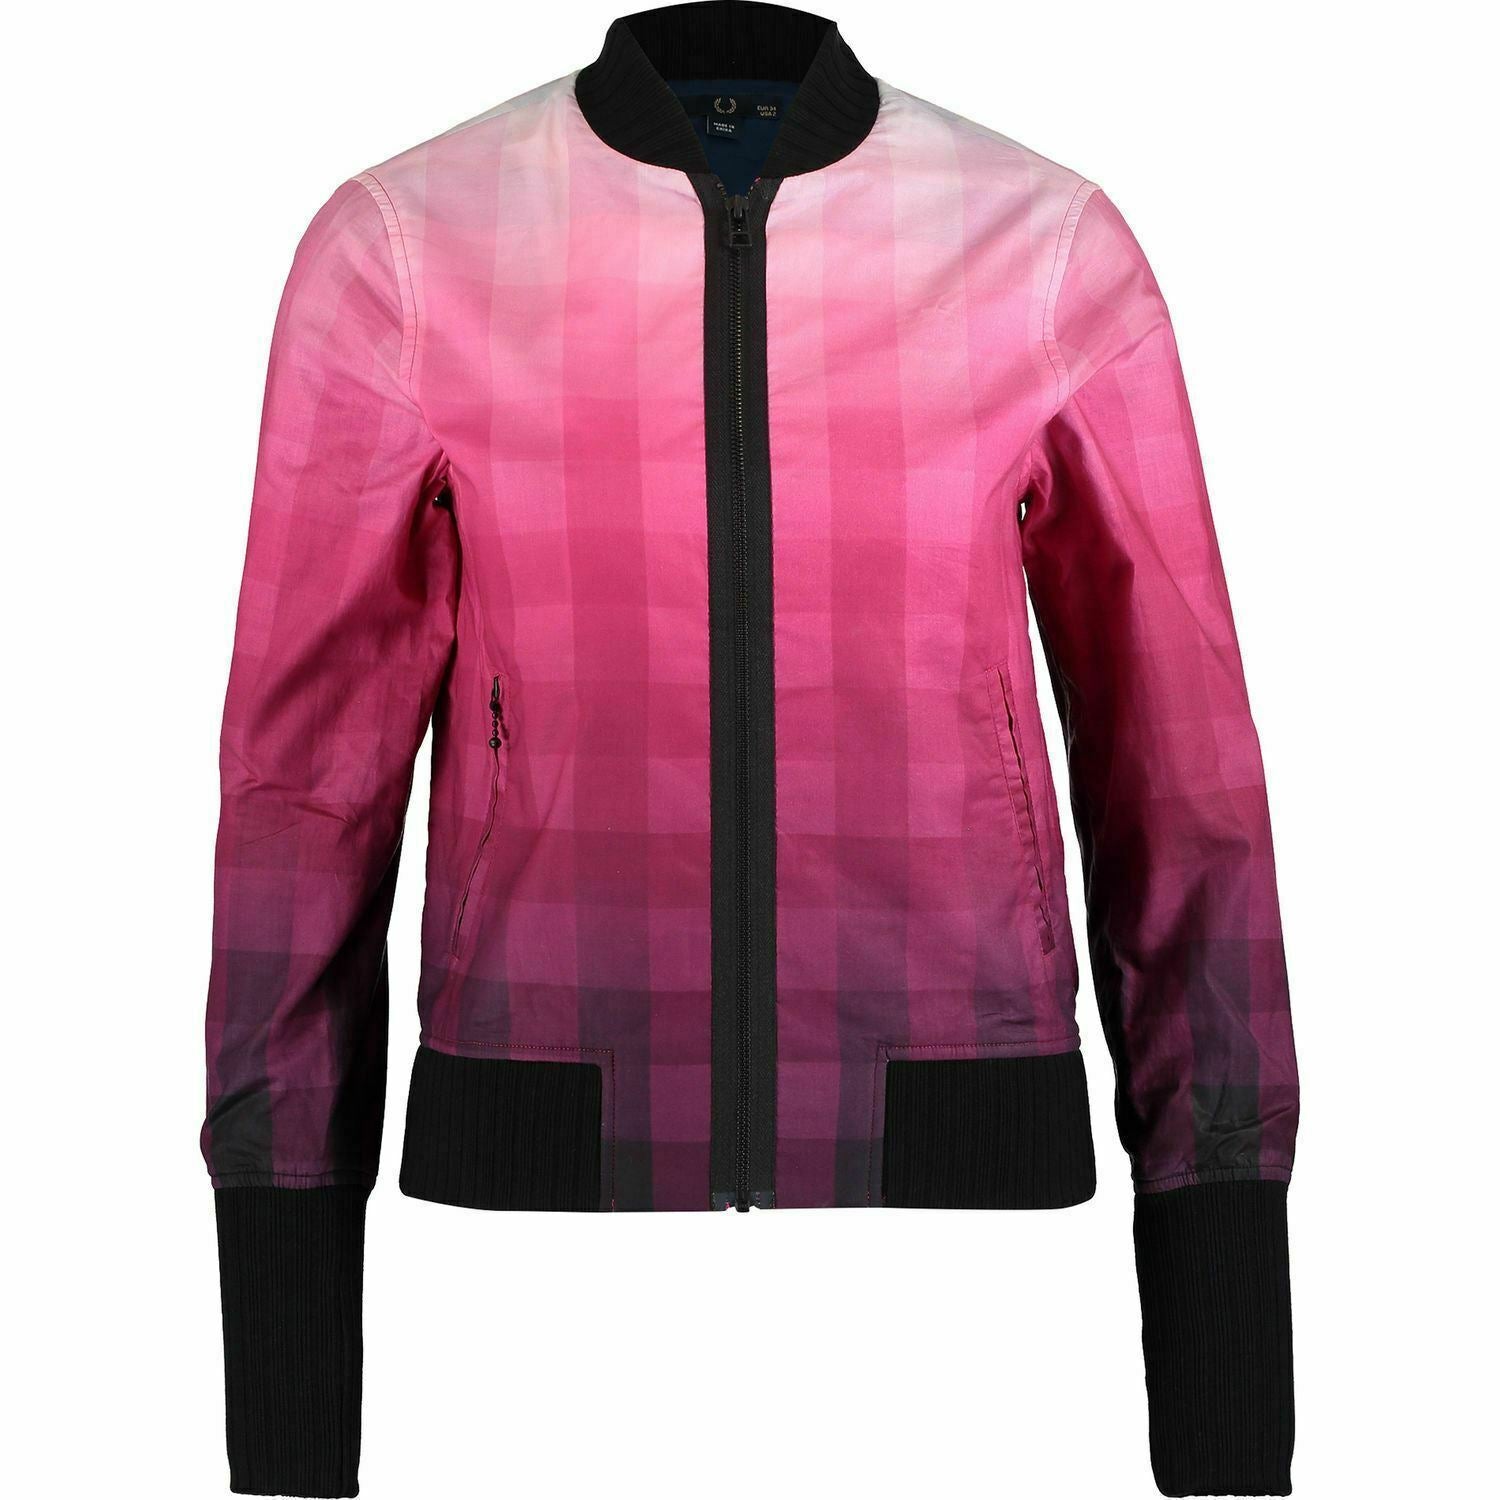 FRED PERRY Women's Pink Ombre Check Bomber Jacket, UK 6 or UK 8